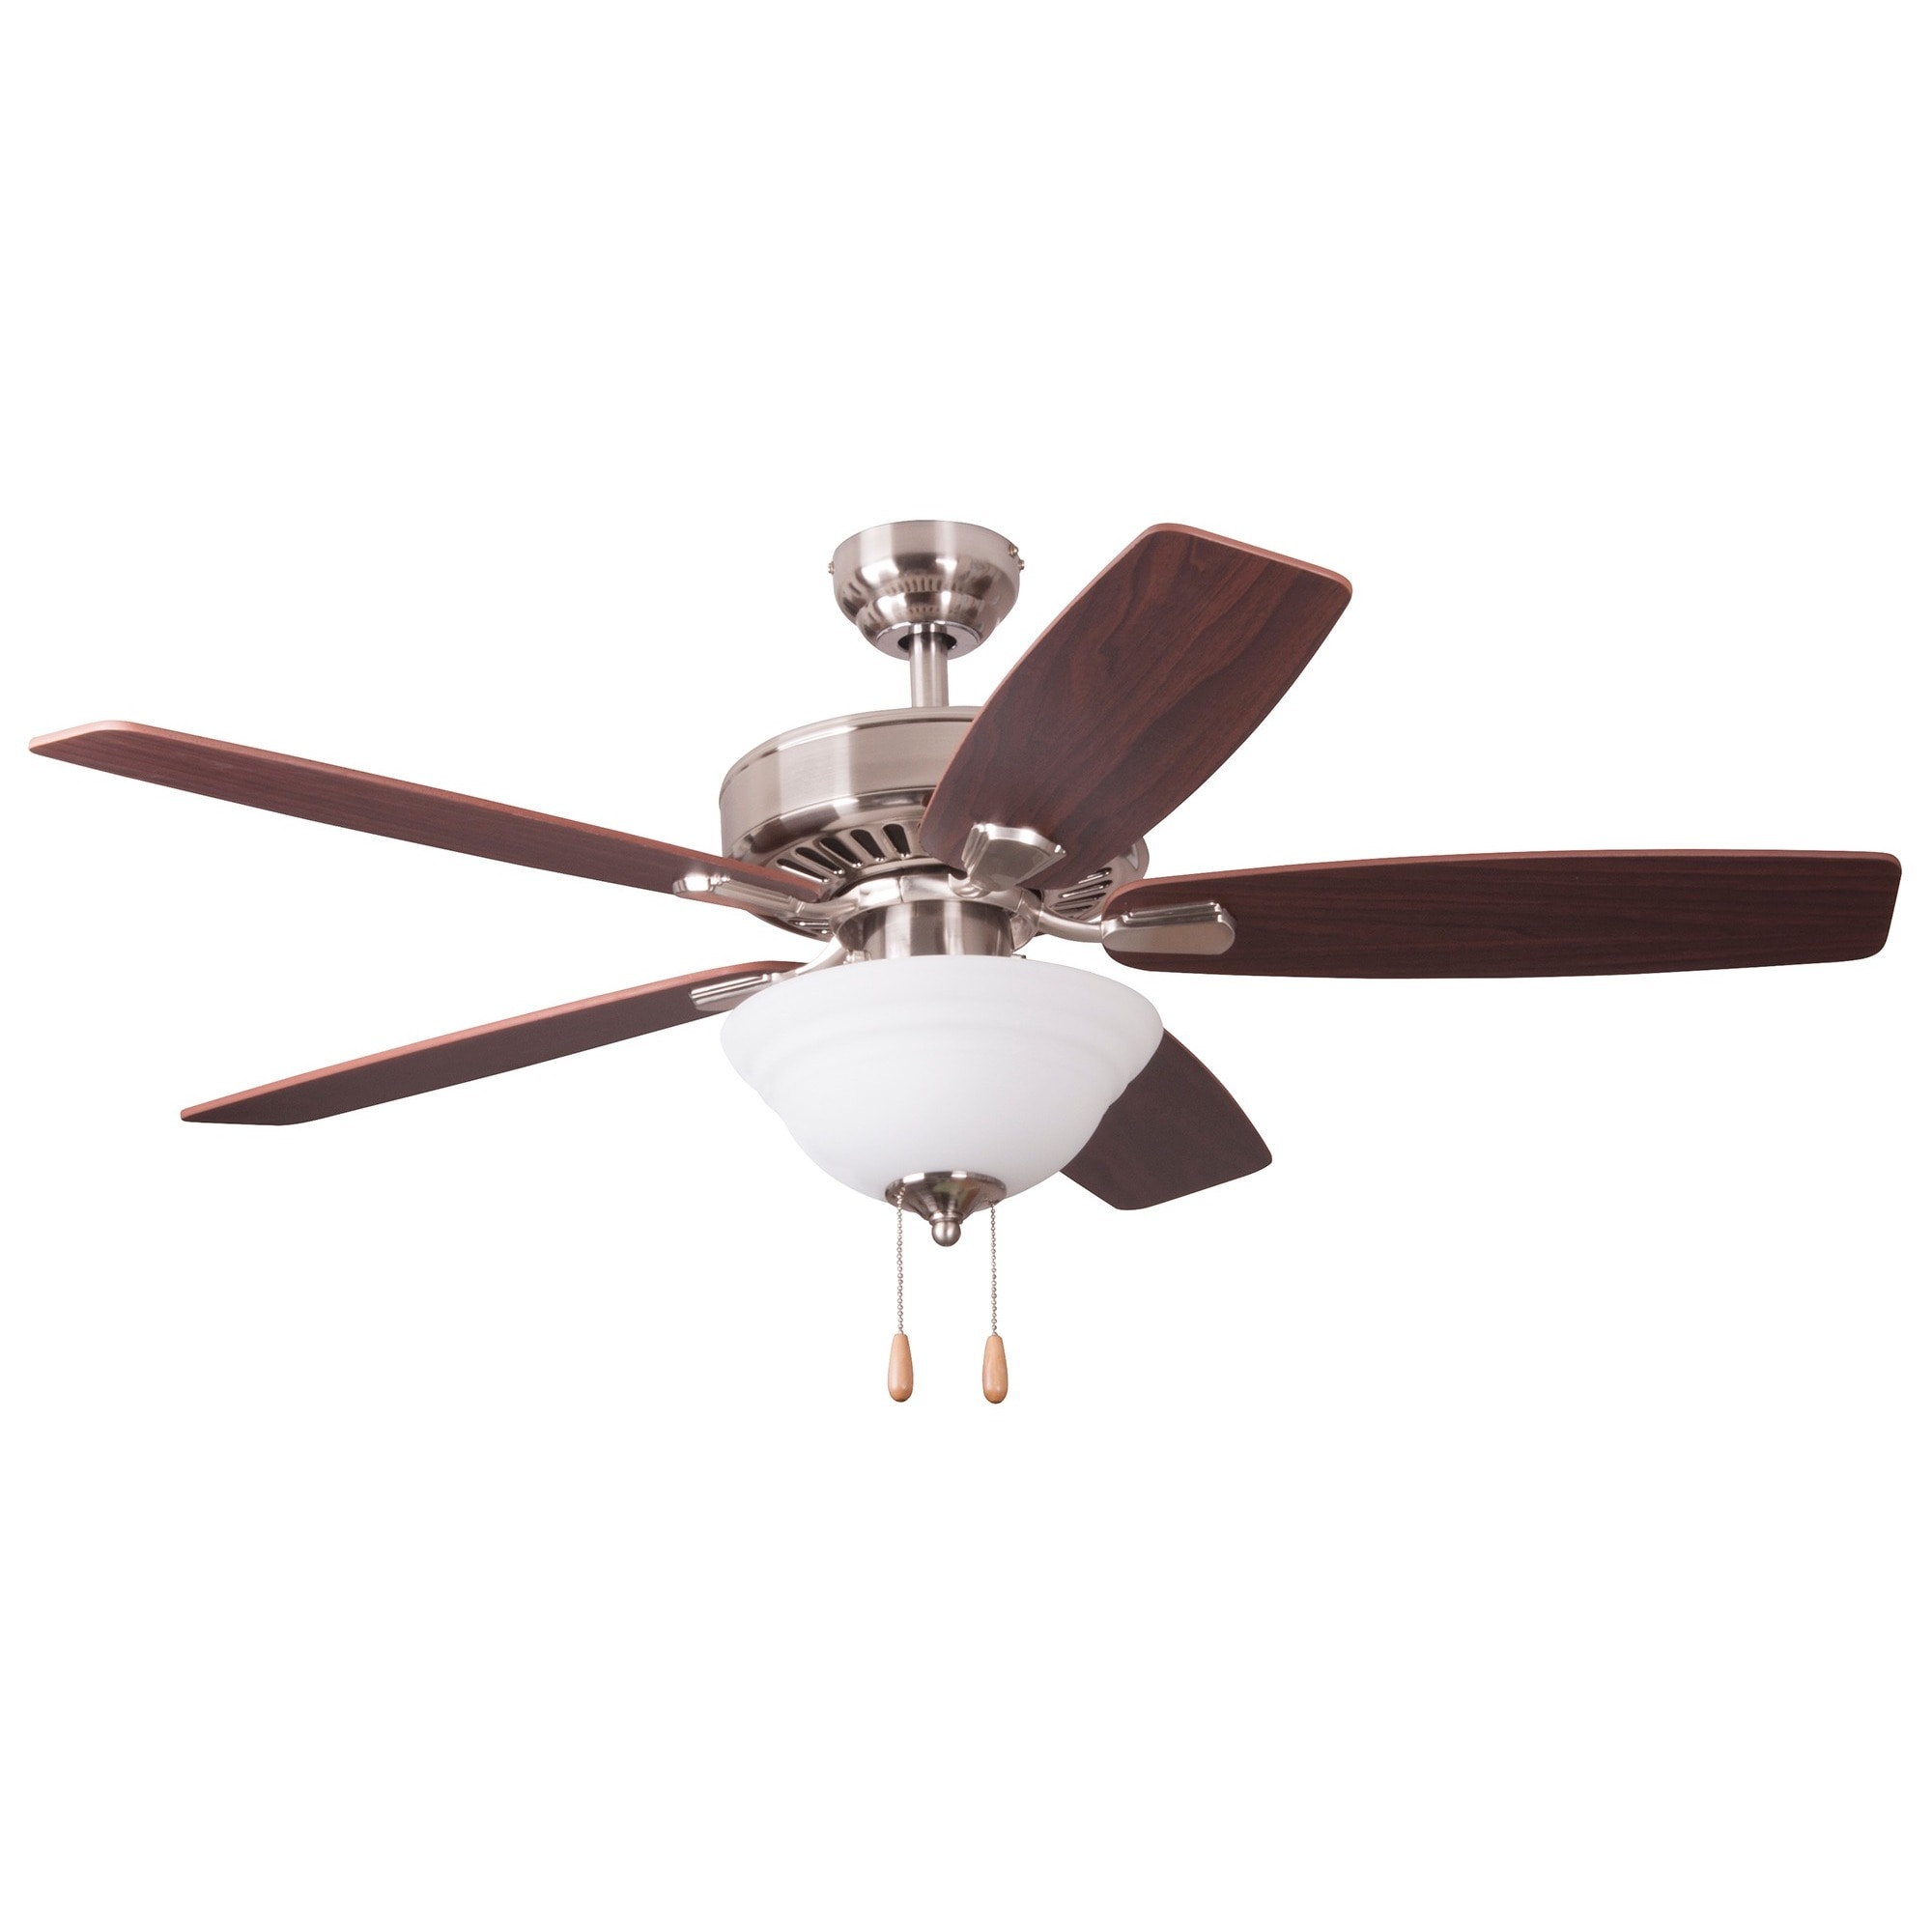 Shop Copper Grove Chortkiv 52 Inch Brushed Nickel Ceiling Fan With